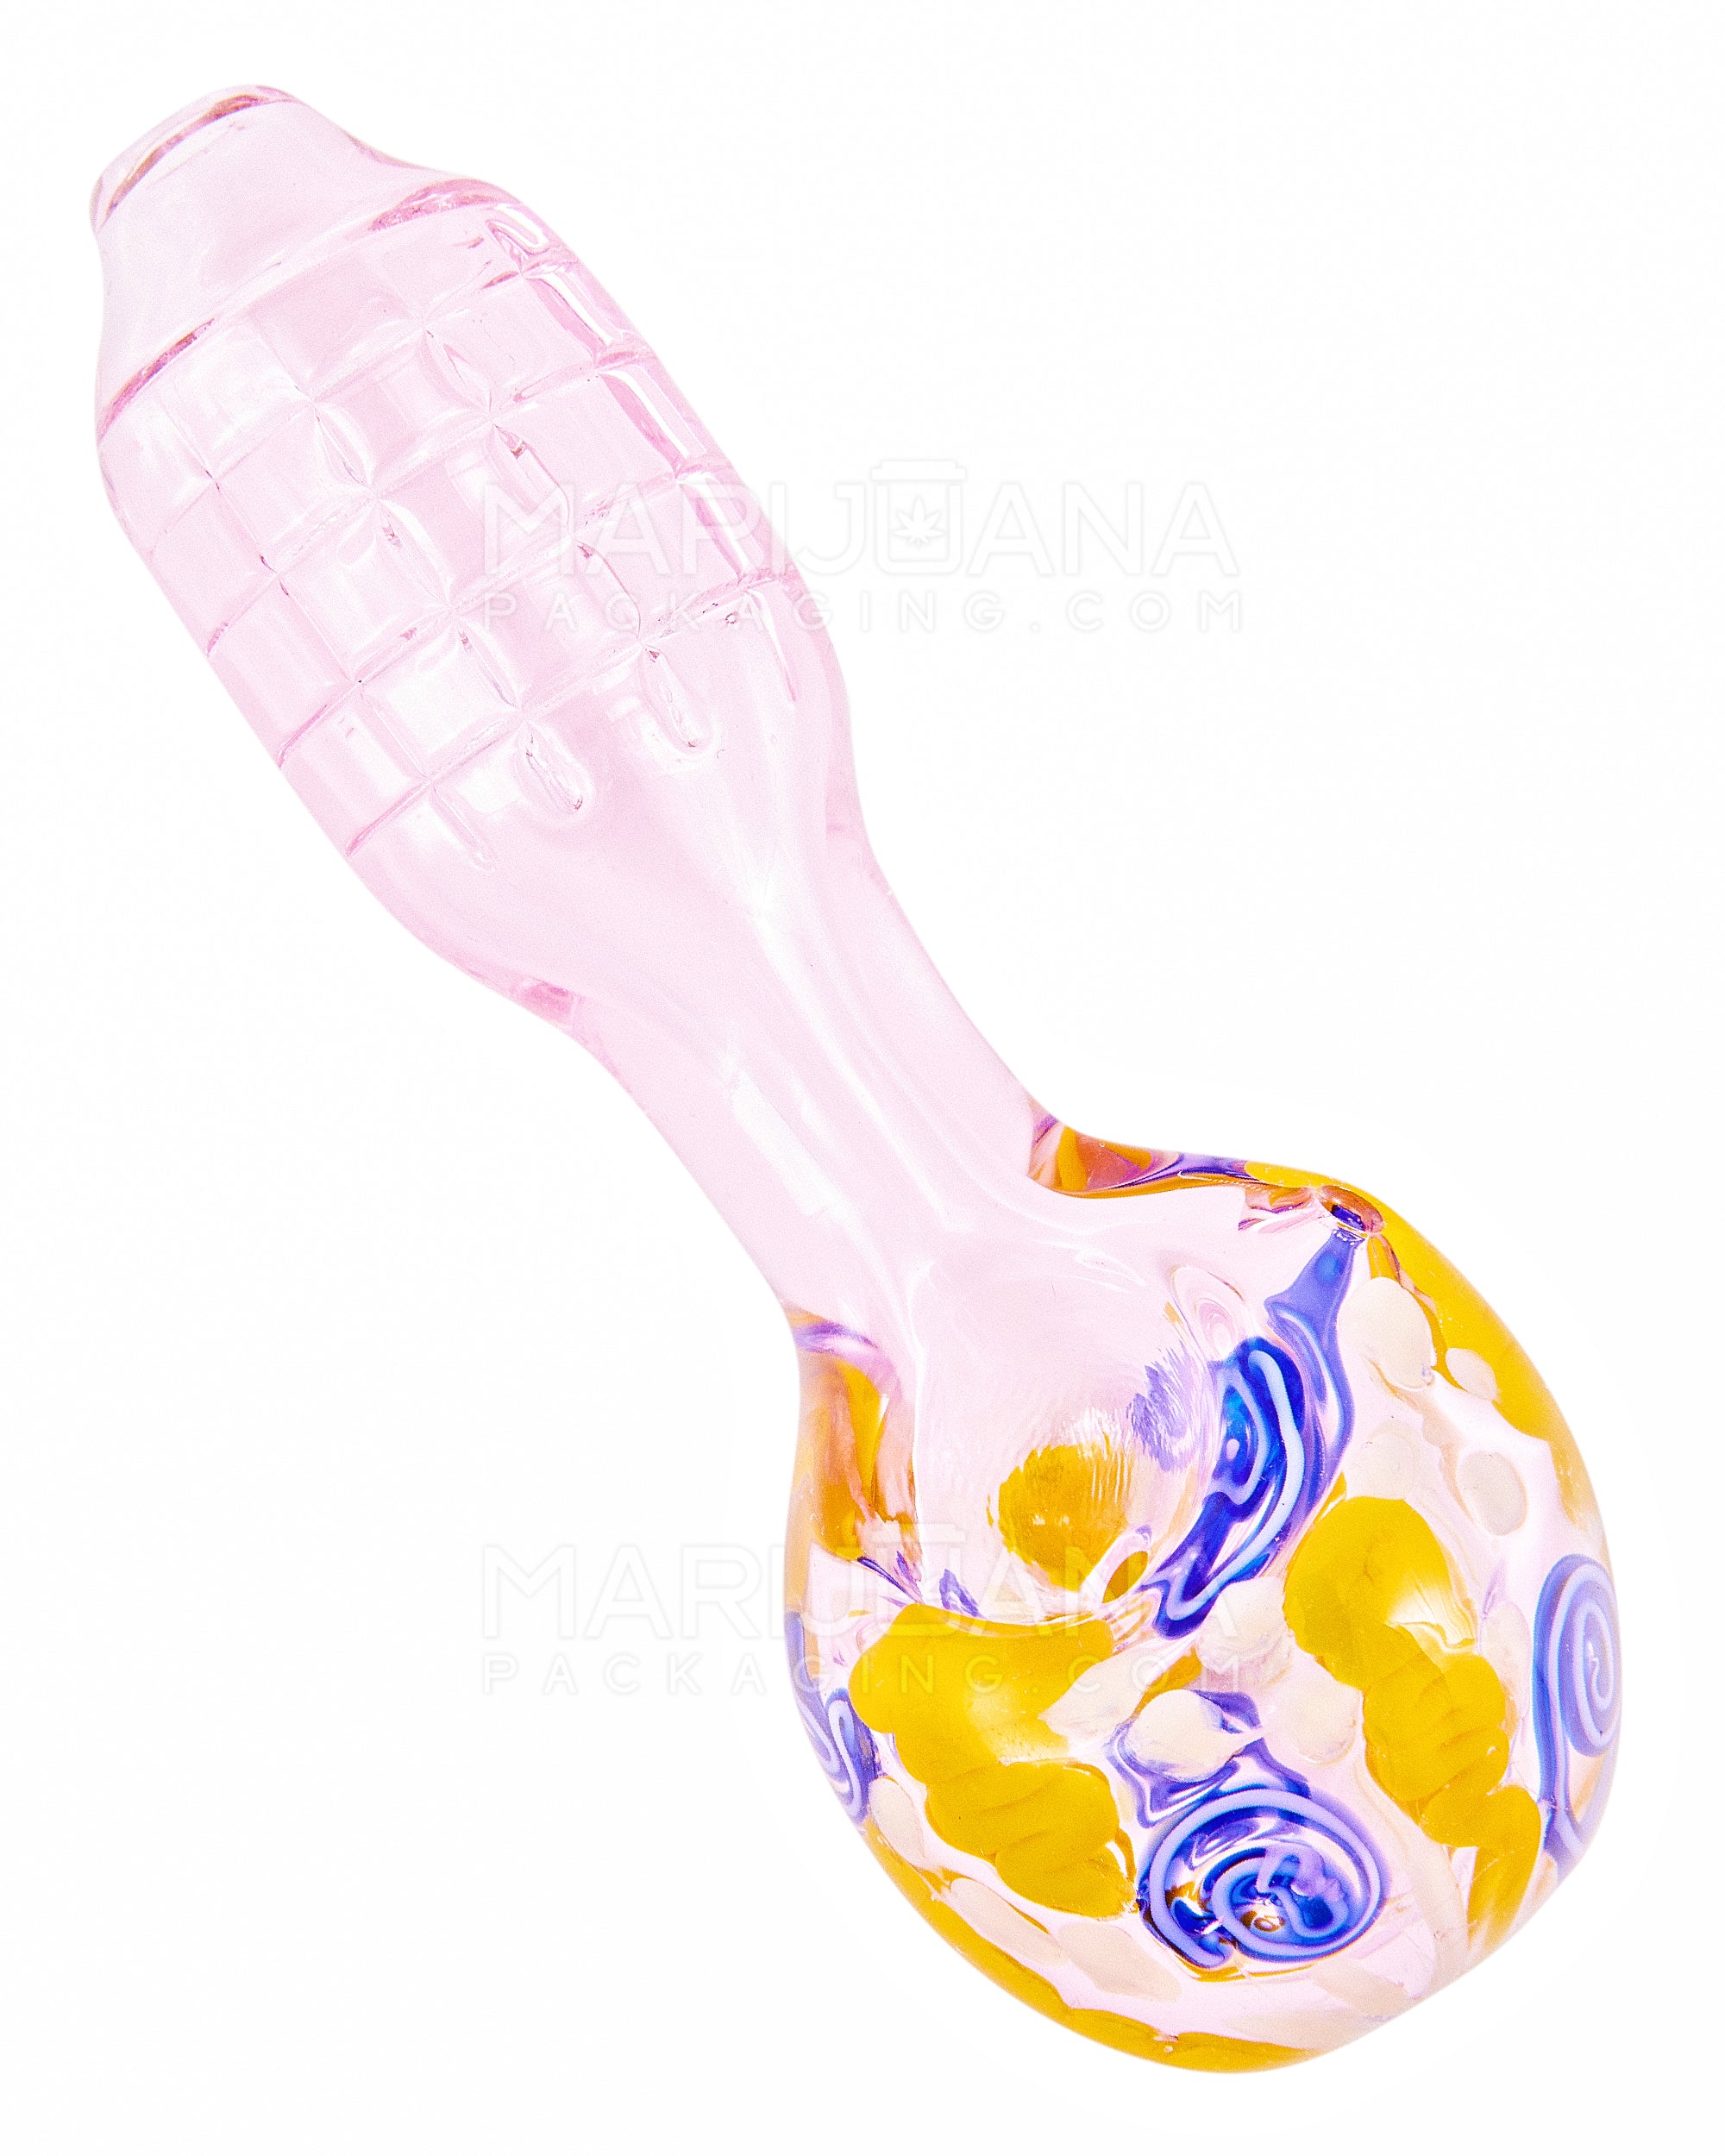 Swirl & Speckled Waffle Spoon Hand Pipe | 4.5in Long - Glass - Assorted - 1